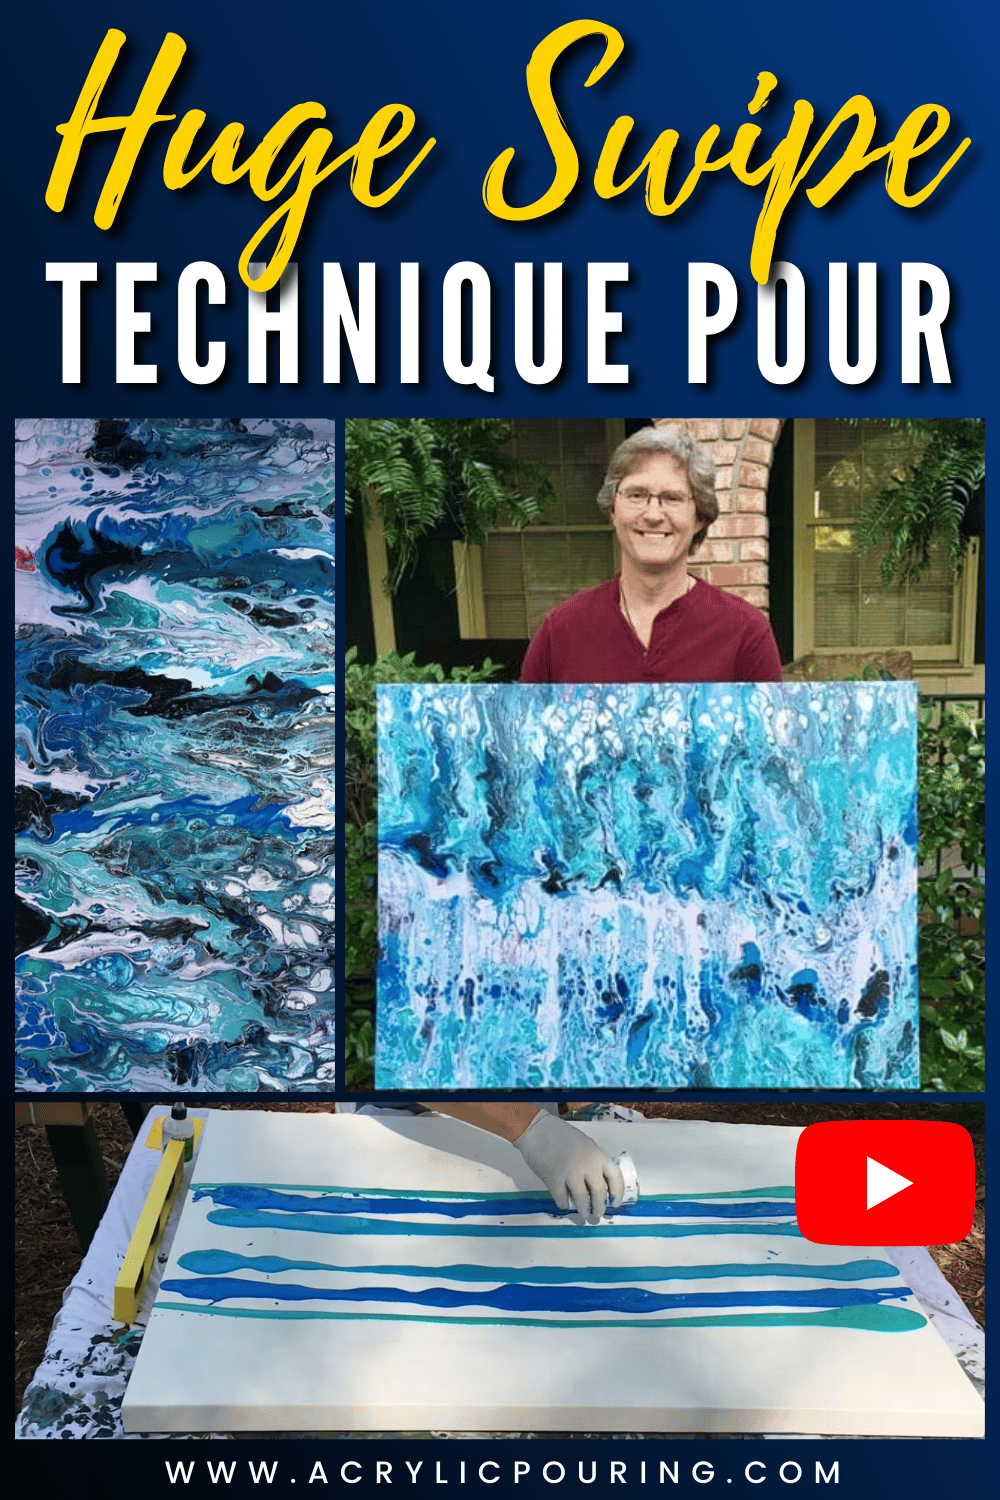 In this video, artist Steve Shaw uses his talents to create a gigantic pour painting. This 30"x40" painting is so large he must leave his studio and work outdoors, and use several large cups of paint to cover the canvas. Materials used are mentioned in the links below.